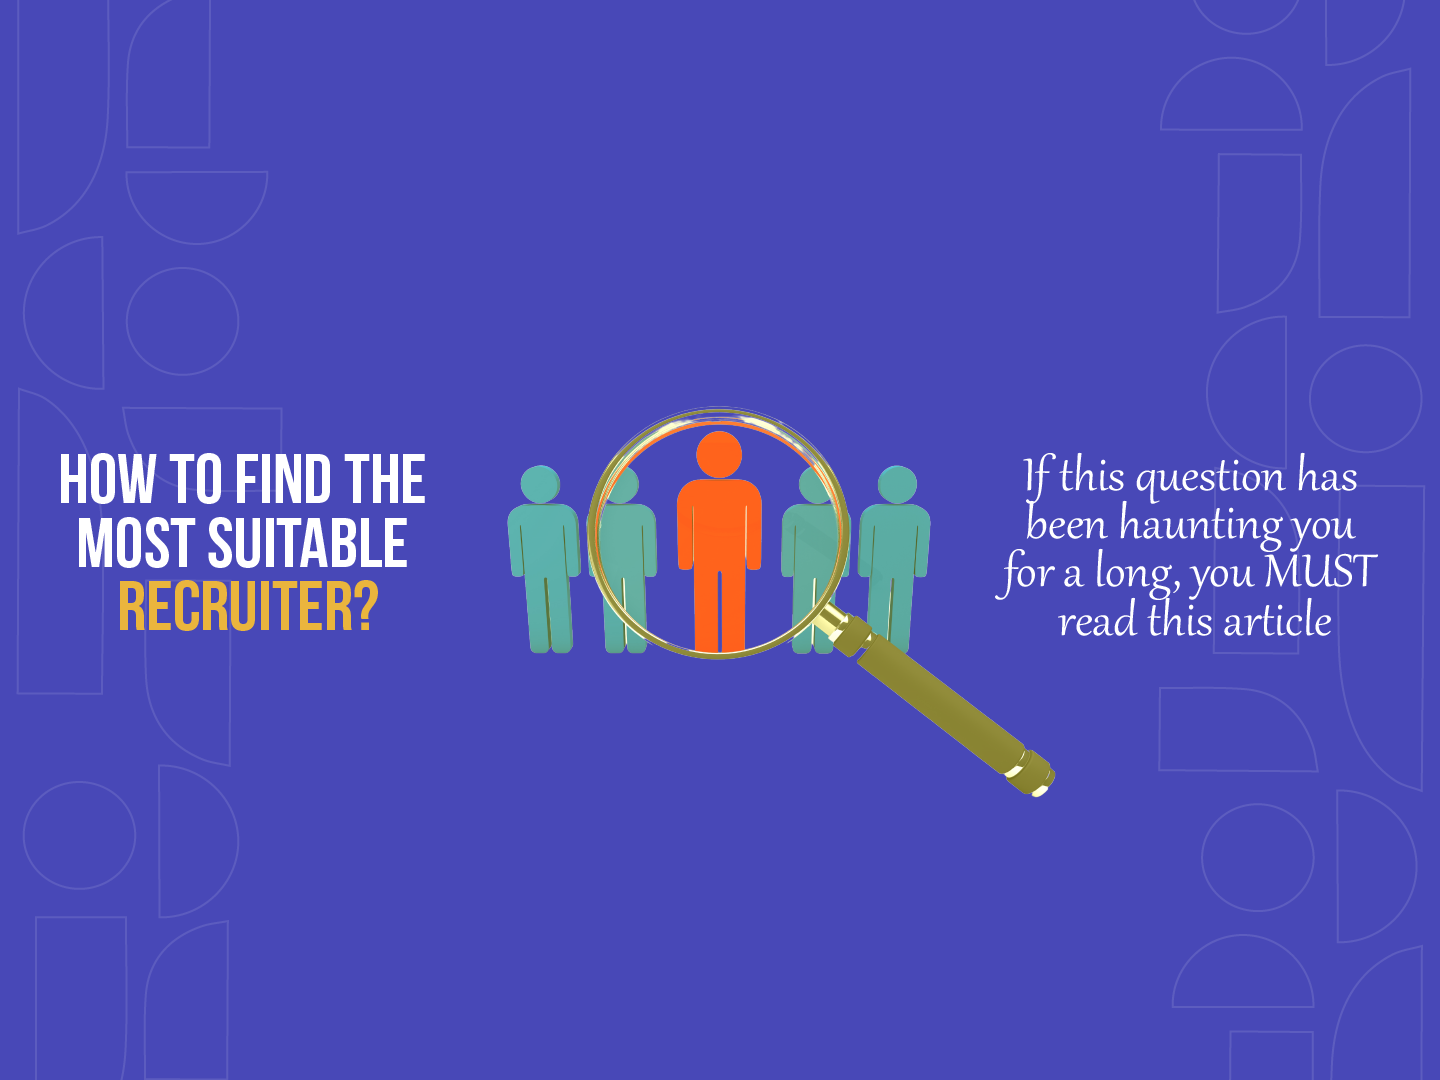 How To Find the Most Suitable Recruiter?